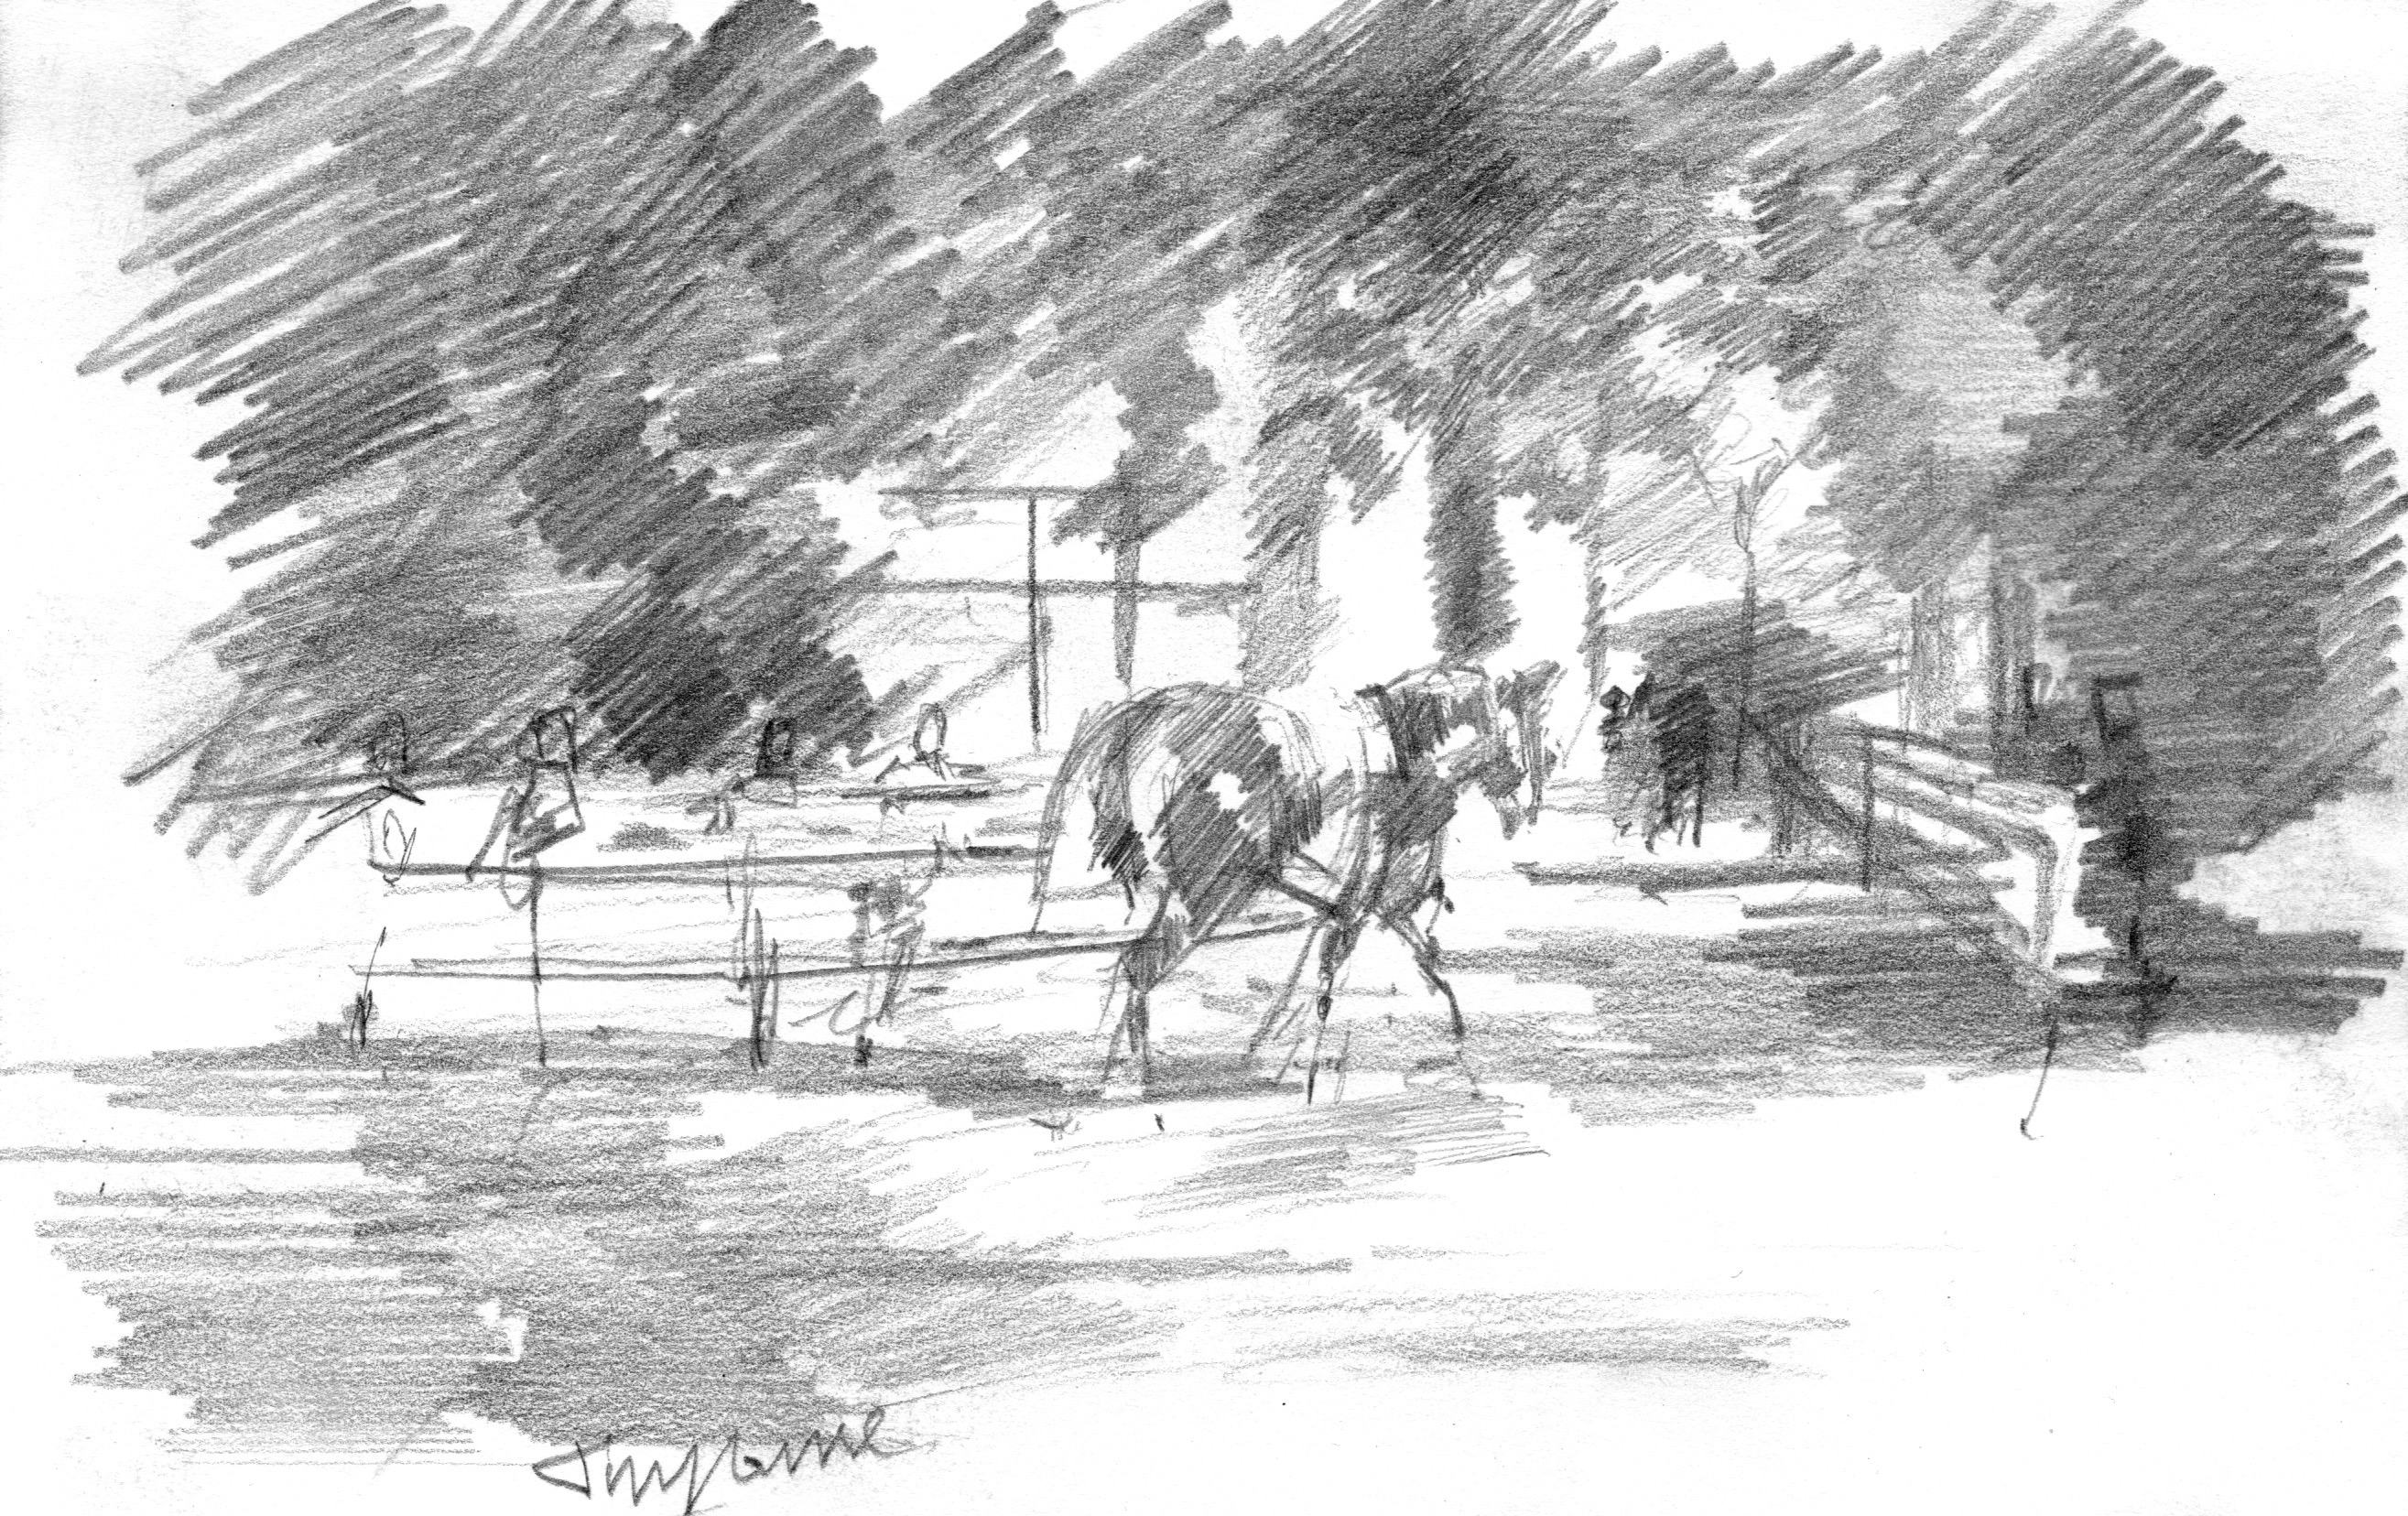 "July Shadows-Sketch" by David 'Mouse' Cooper.